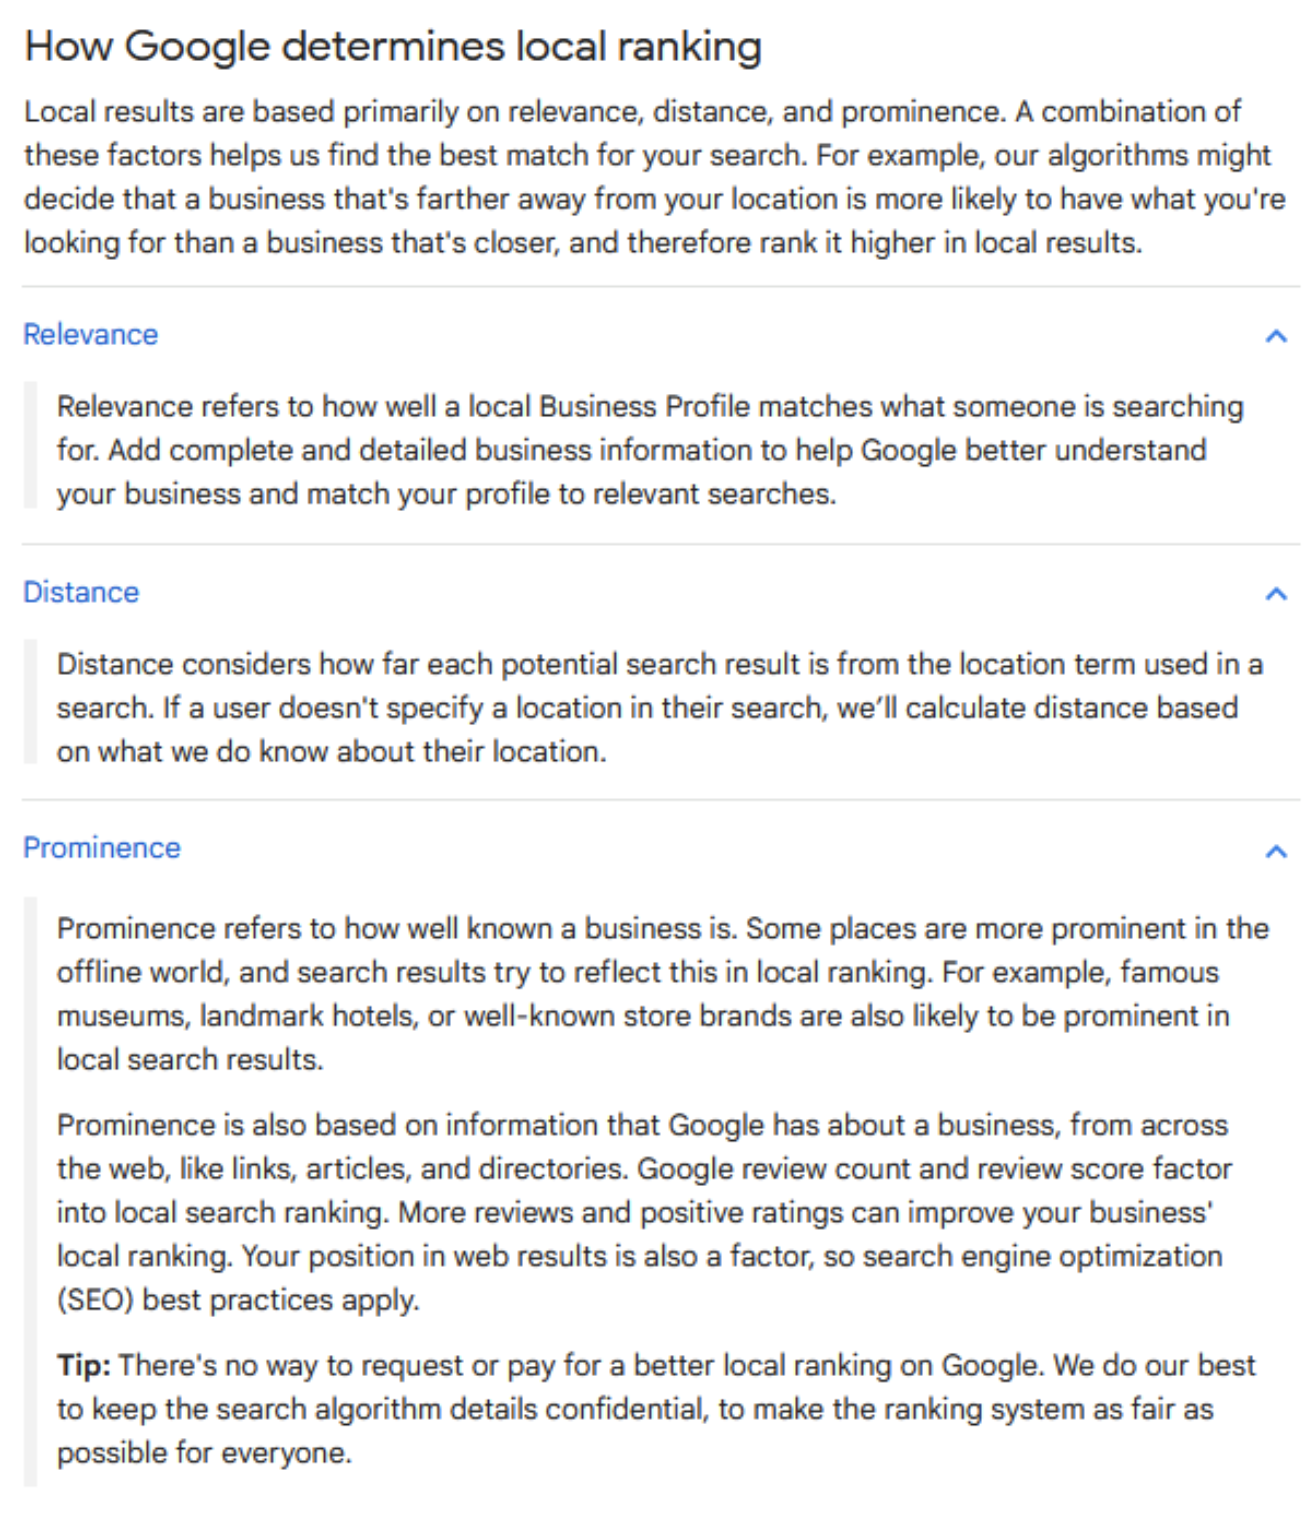 outline of how Google determines local ranking